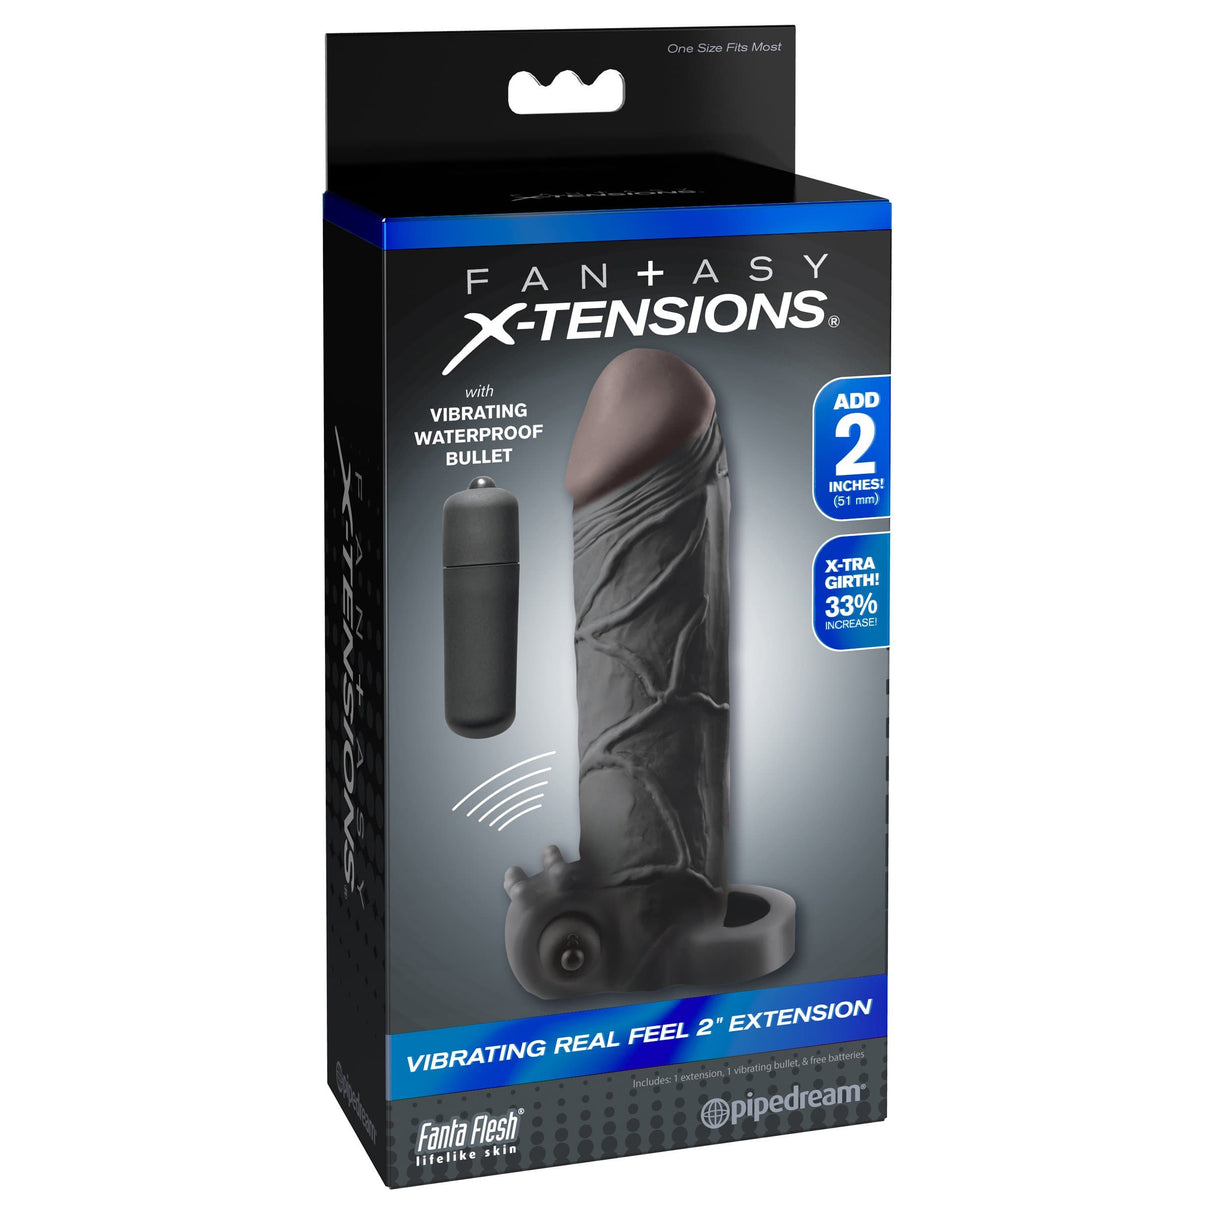 Pipedream - Fantasy X-tensions Vibrating Real Feel Extension 2" (Black) PD1221 CherryAffairs